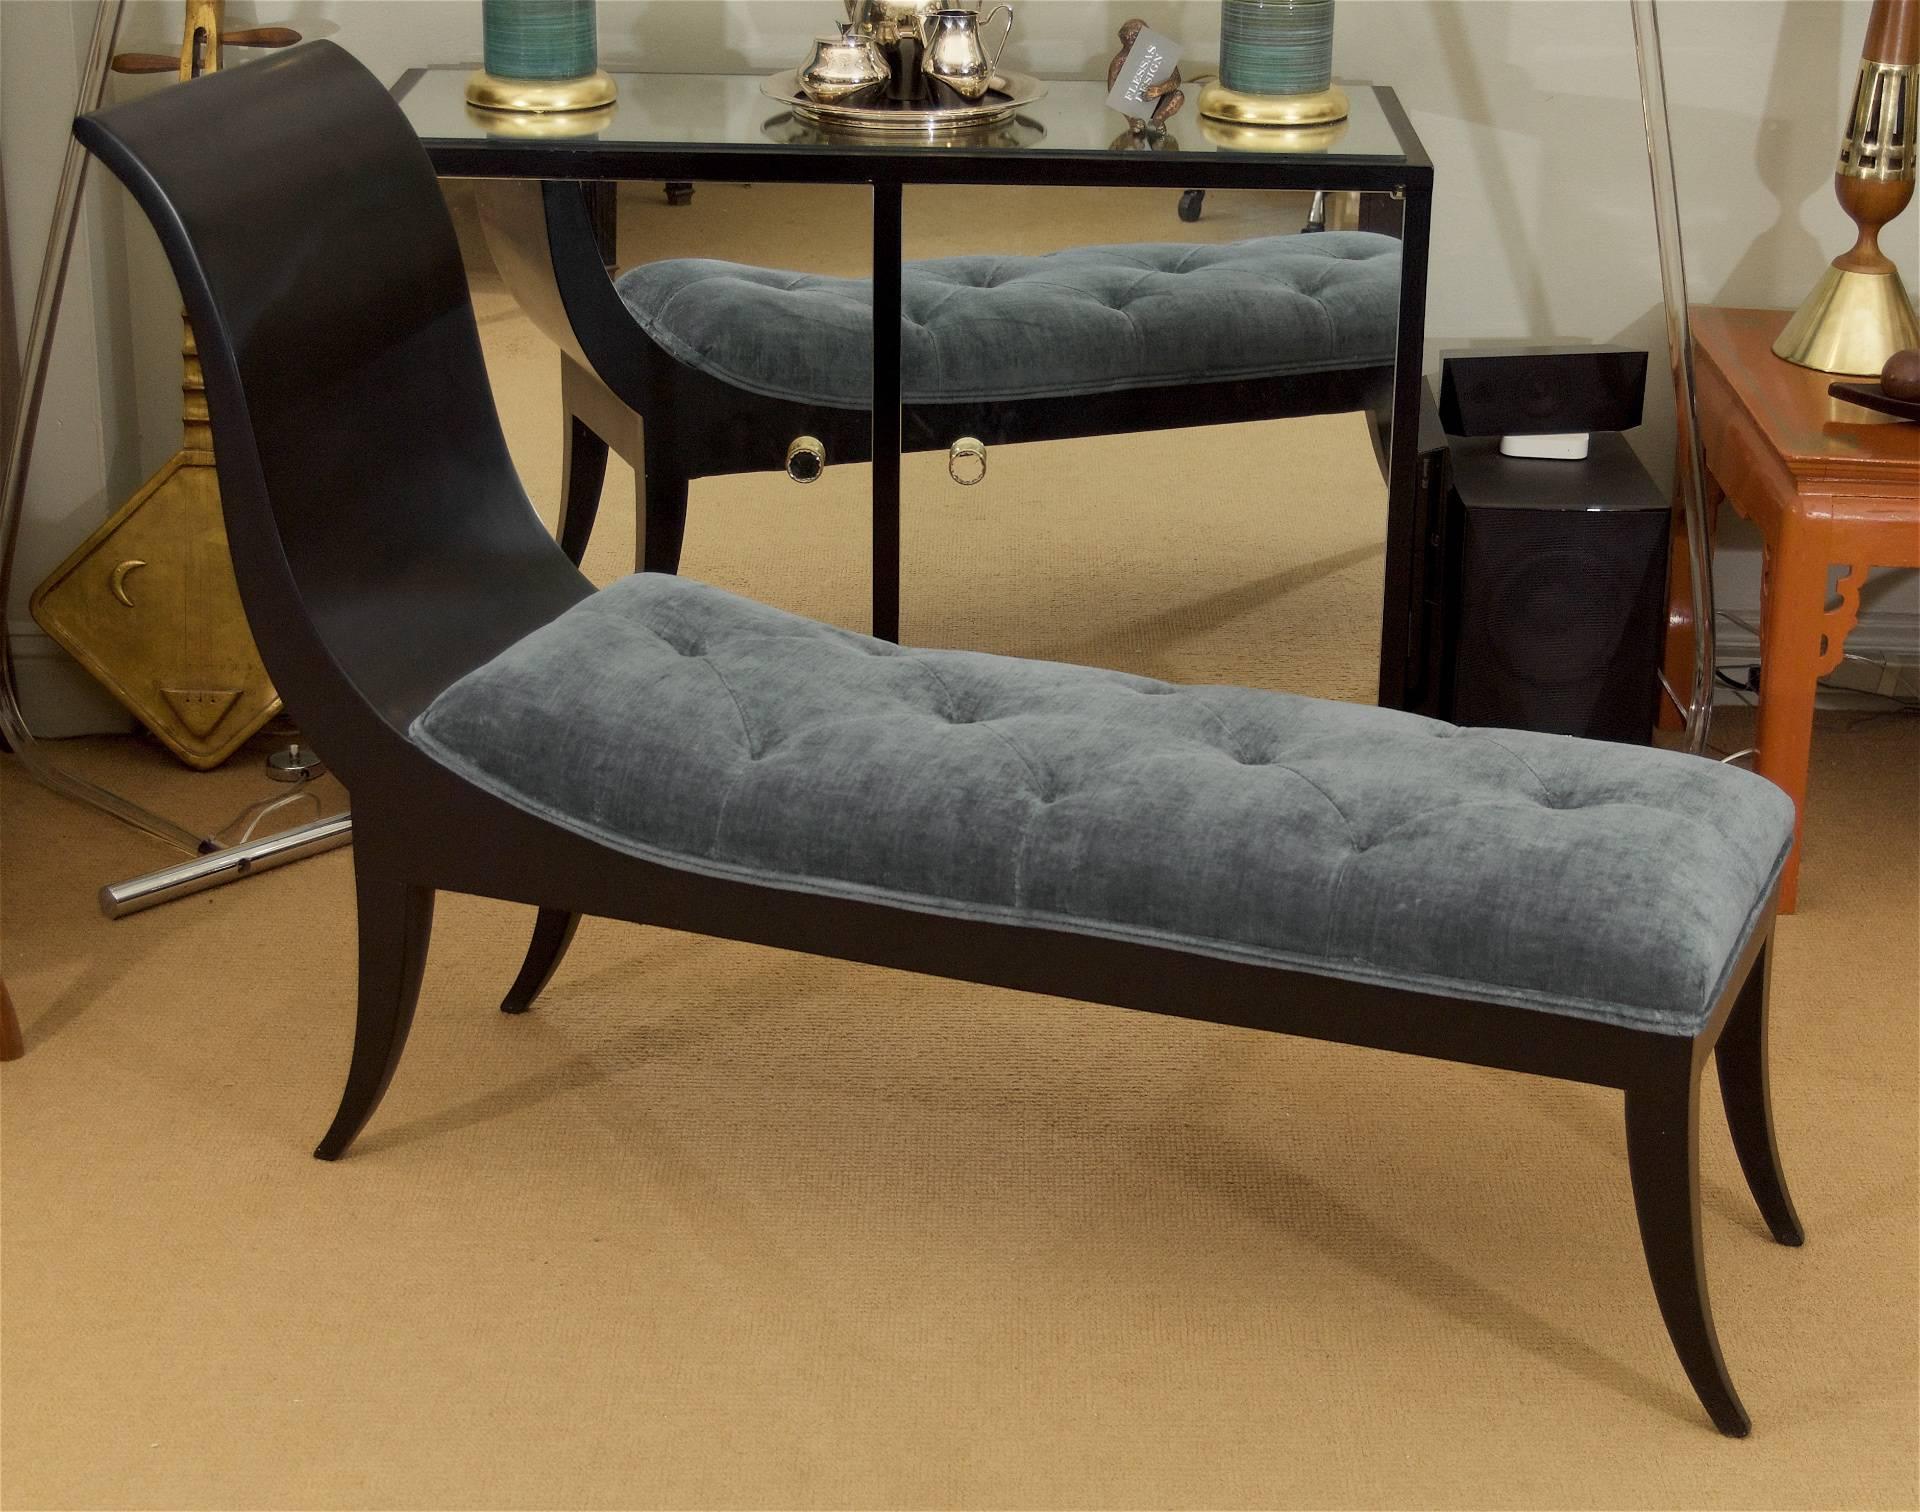 A stylish early 20th century French Art Deco period chaise with streamlined sabre legs and a streamlined back; newly refinished in satin black lacquer and reupholstered in minimally tufted soft stone blue velvet.

Comfortable and conveniently